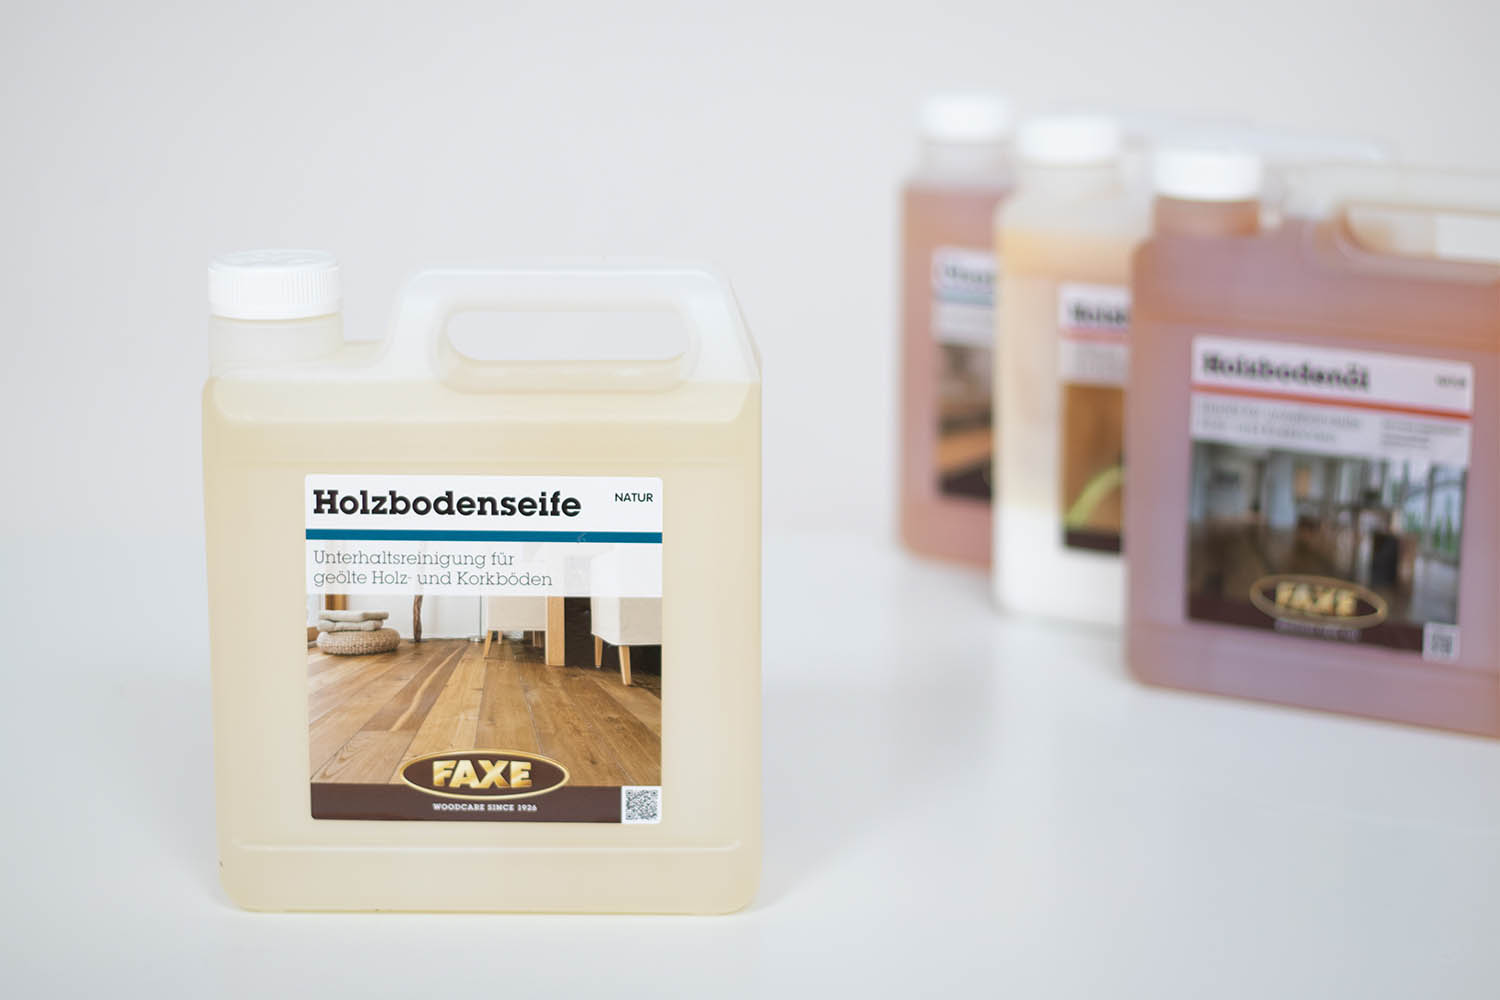 FAXE Holzbodenseife natur